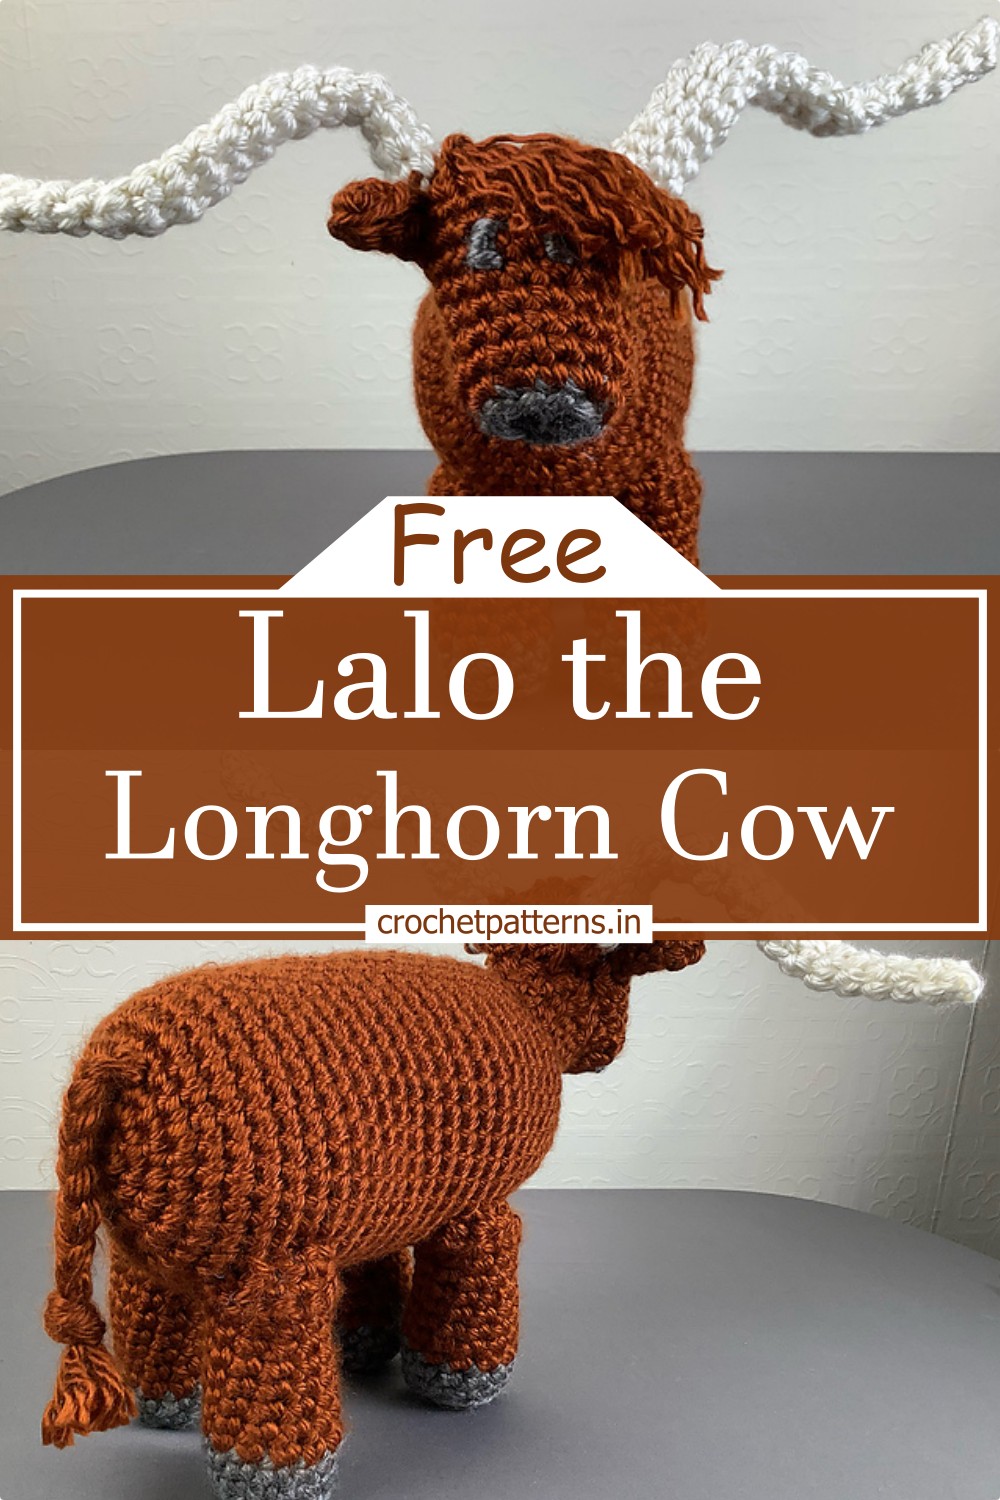 Lalo the Longhorn Cow